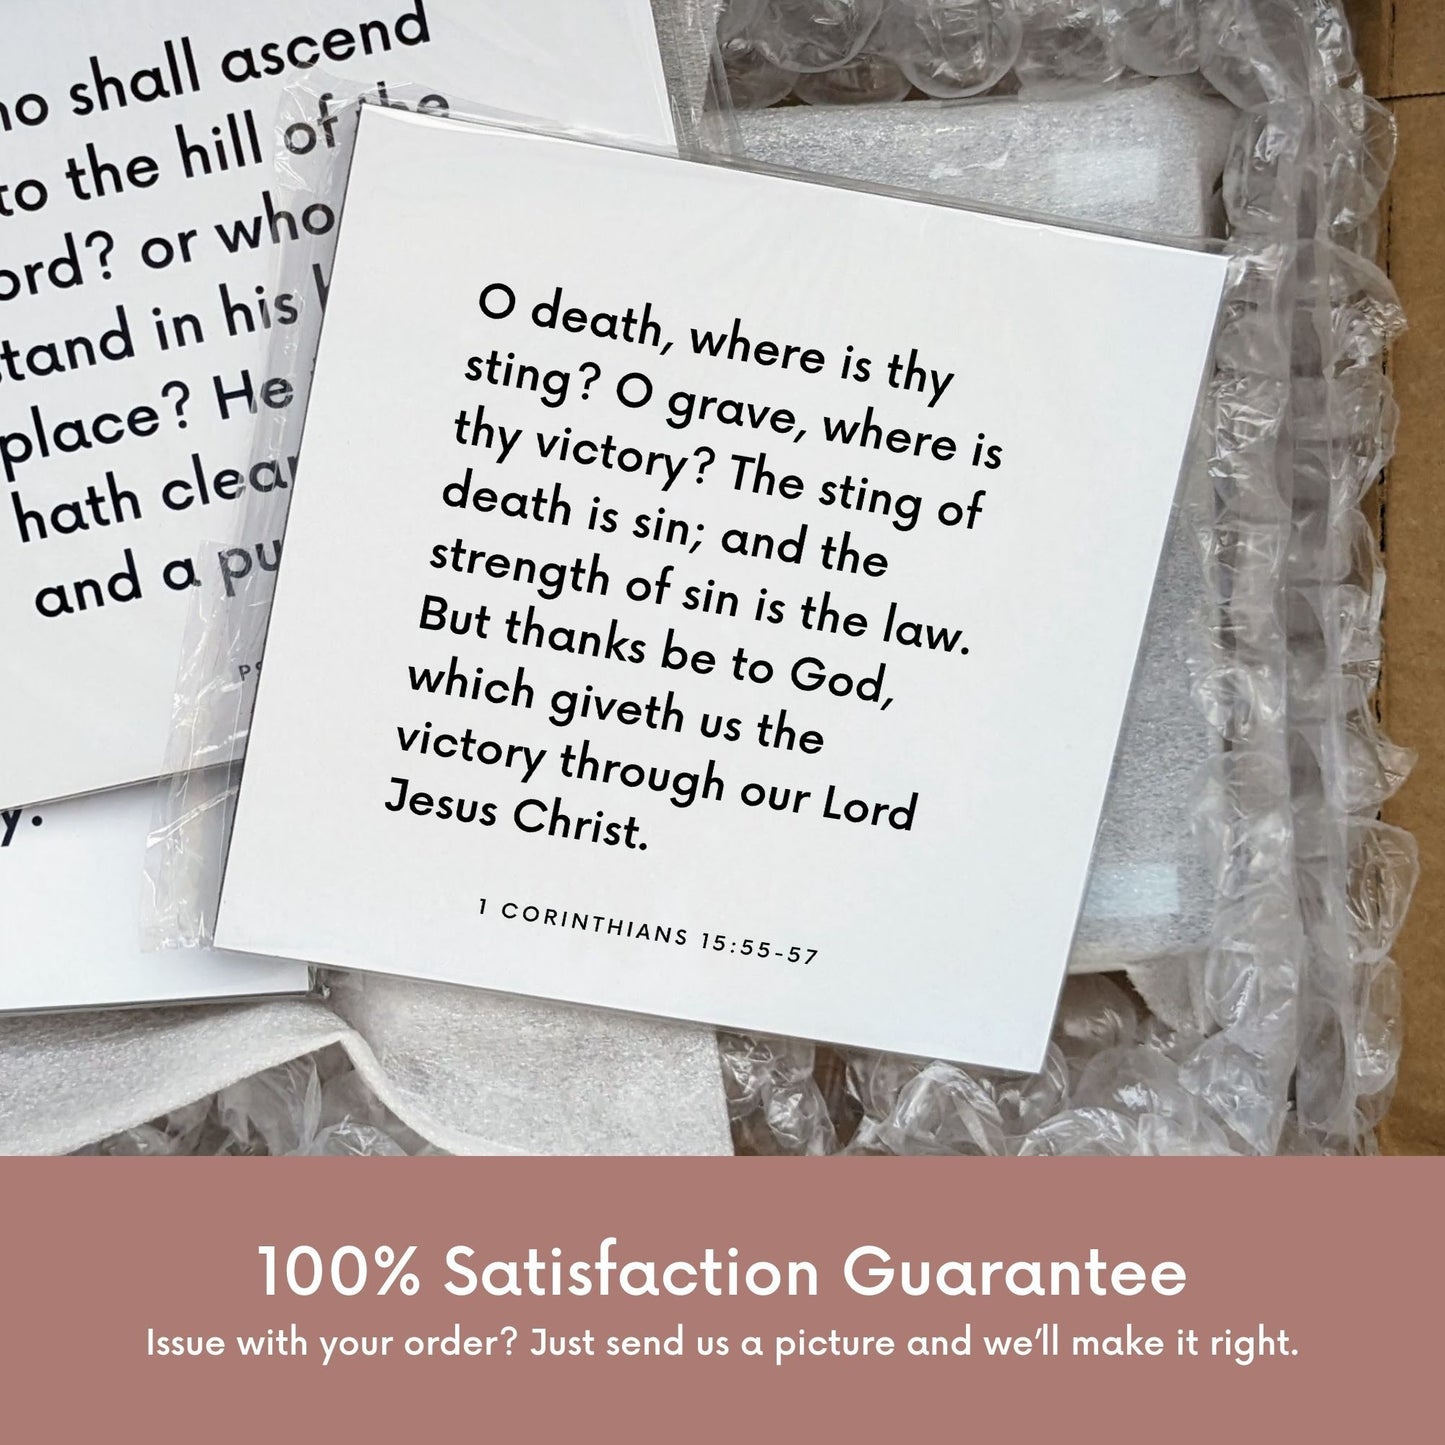 Shipping materials for scripture tile of 1 Corinthians 15:55-57 - "O death, where is thy sting? O grave, where is thy victory?"